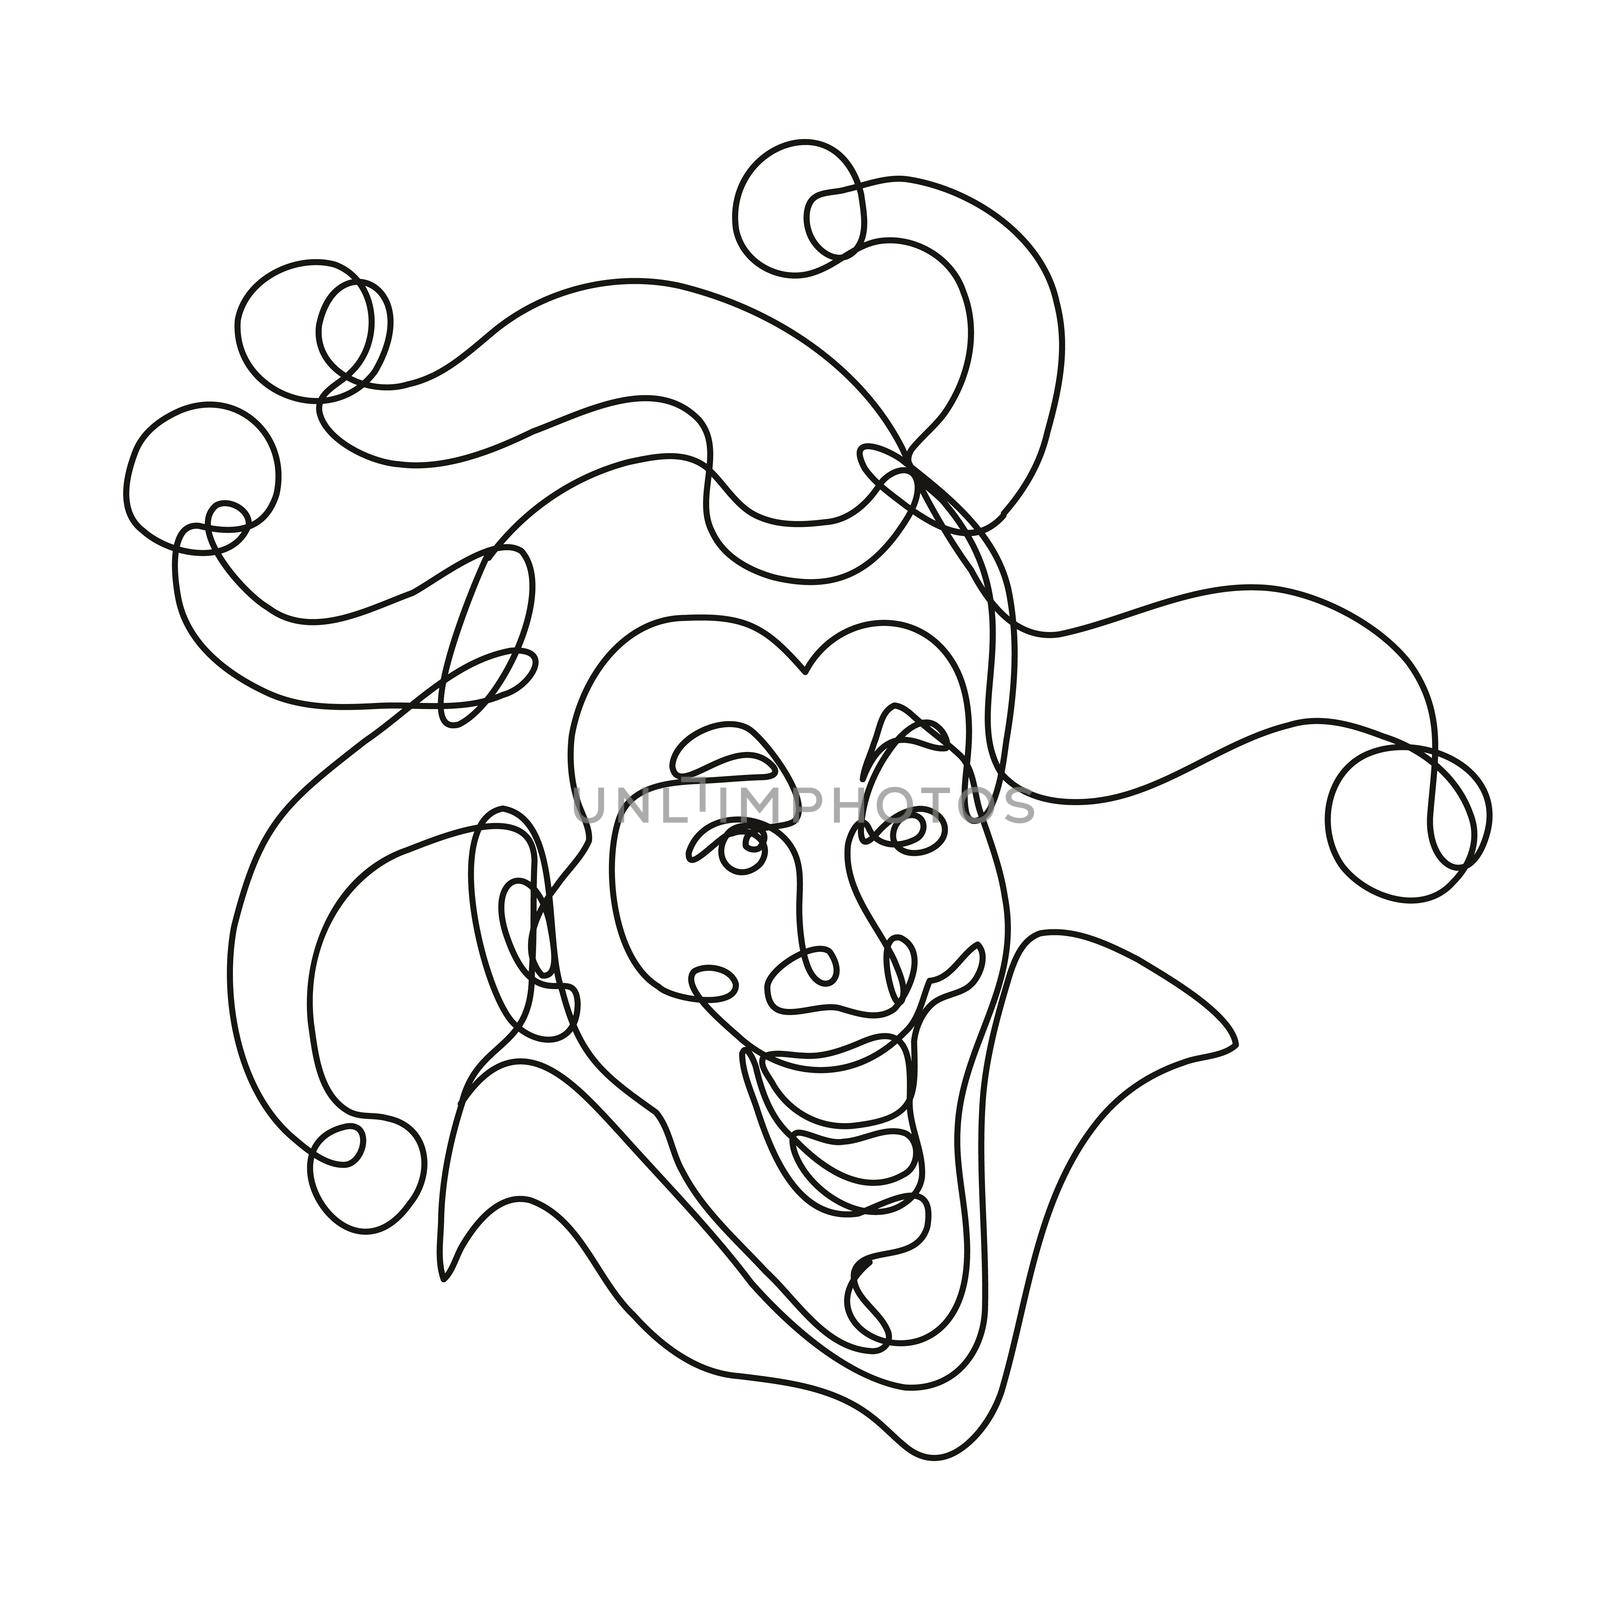 Continuous line drawing illustration of a medieval court jester head front view done in mono line or doodle style in black and white on isolated background. 